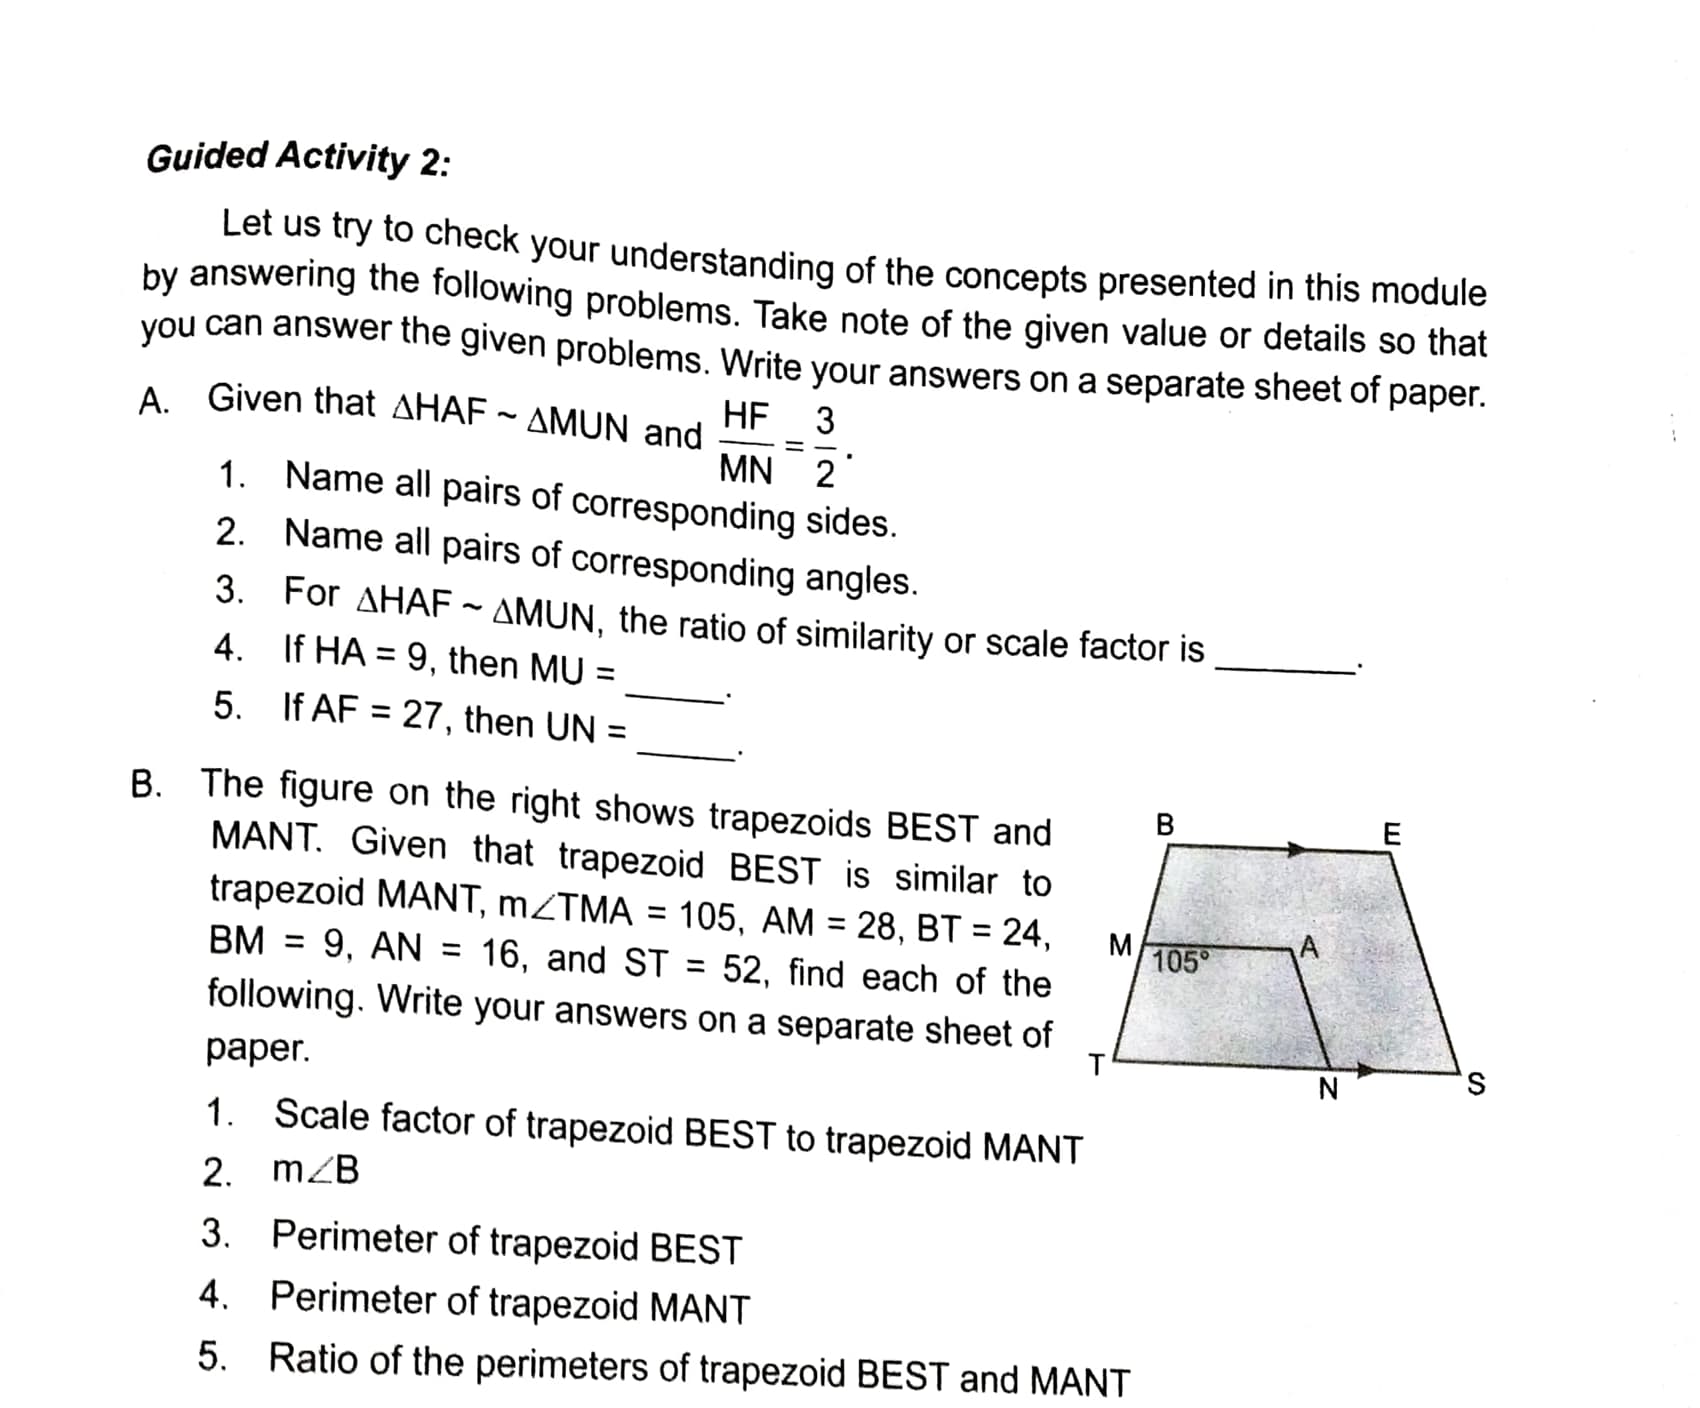 Guided Activity 2:
Let us try to check your understanding of the concepts presented in this module
by answering the following problems. Take note of the given value or details so that
you can answer the given problems. Write your answers on a separate sheet of paper.
A Given that AHAF ~ AMUN and
HF
3
MN 2
1. Name all pairs of corresponding sides.
2. Name all pairs of corresponding angles.
3. For AHAF ~ AMUN, the ratio of similarity or scale factor is
4. If HA = 9, then MU =
%3D
5. If AF = 27, then UN =
%3D
B. The figure on the right shows trapezoids BEST and
MANT. Given that trapezoid BEST is similar to
trapezoid MANT, MZTMA = 105, AM = 28, BT = 24,
9, AN =
B.
105°
%3D
BM
16, and ST
52, find each of the
%3D
%3D
following. Write your answers on a separate sheet of
S,
раper.
1. Scale factor of trapezoid BEST to trapezoid MANT
2. mZB
3. Perimeter of trapezoid BEST
4. Perimeter of trapezoid MANT
5. Ratio of the perimeters of trapezoid BEST and MANT
